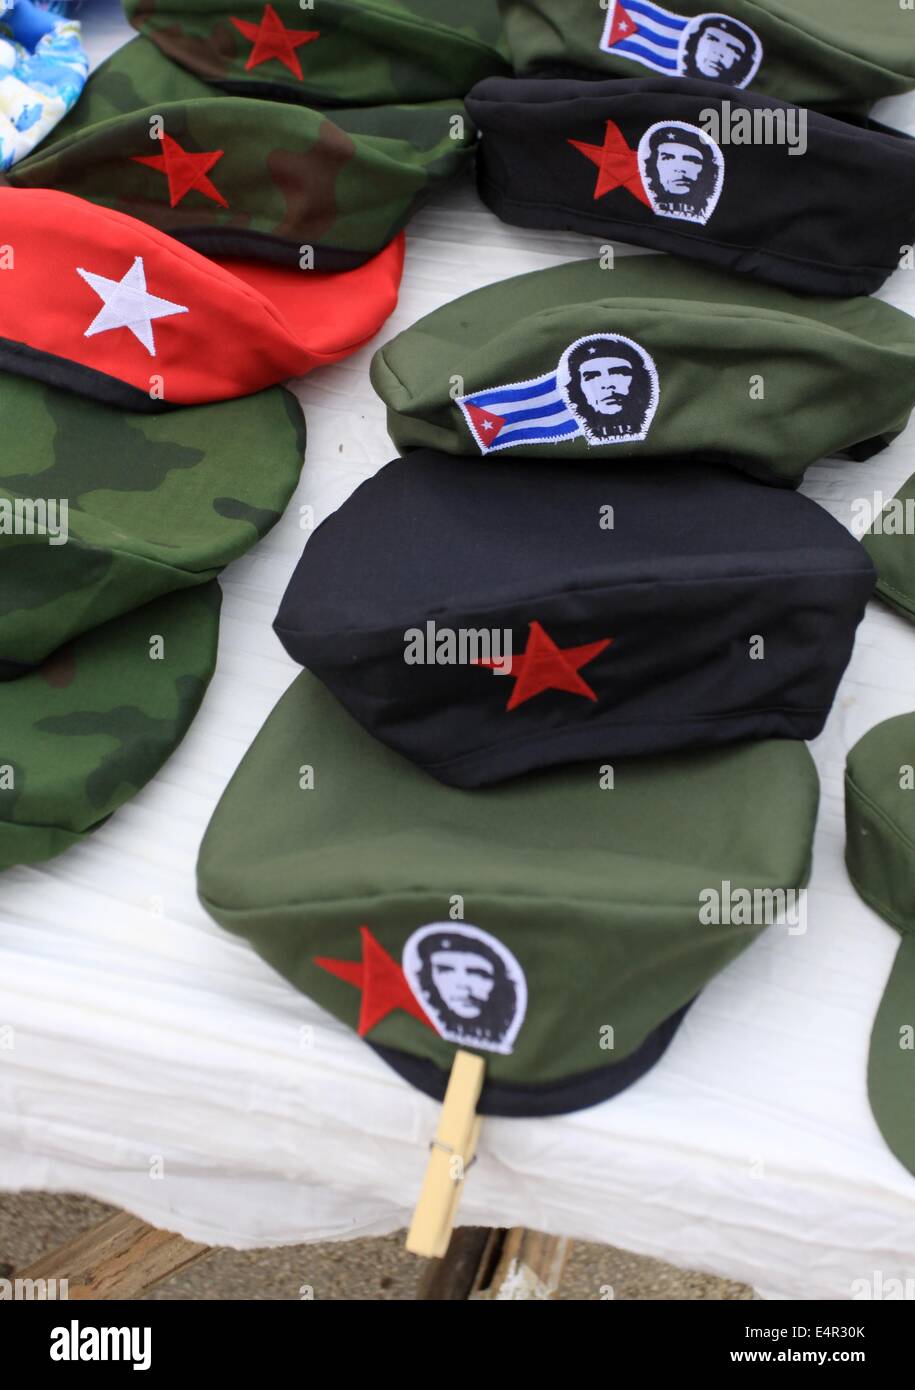 Typical Cuban souvenirs - berets with the red star and a depiction of  revolutionary hero Ernesto Che